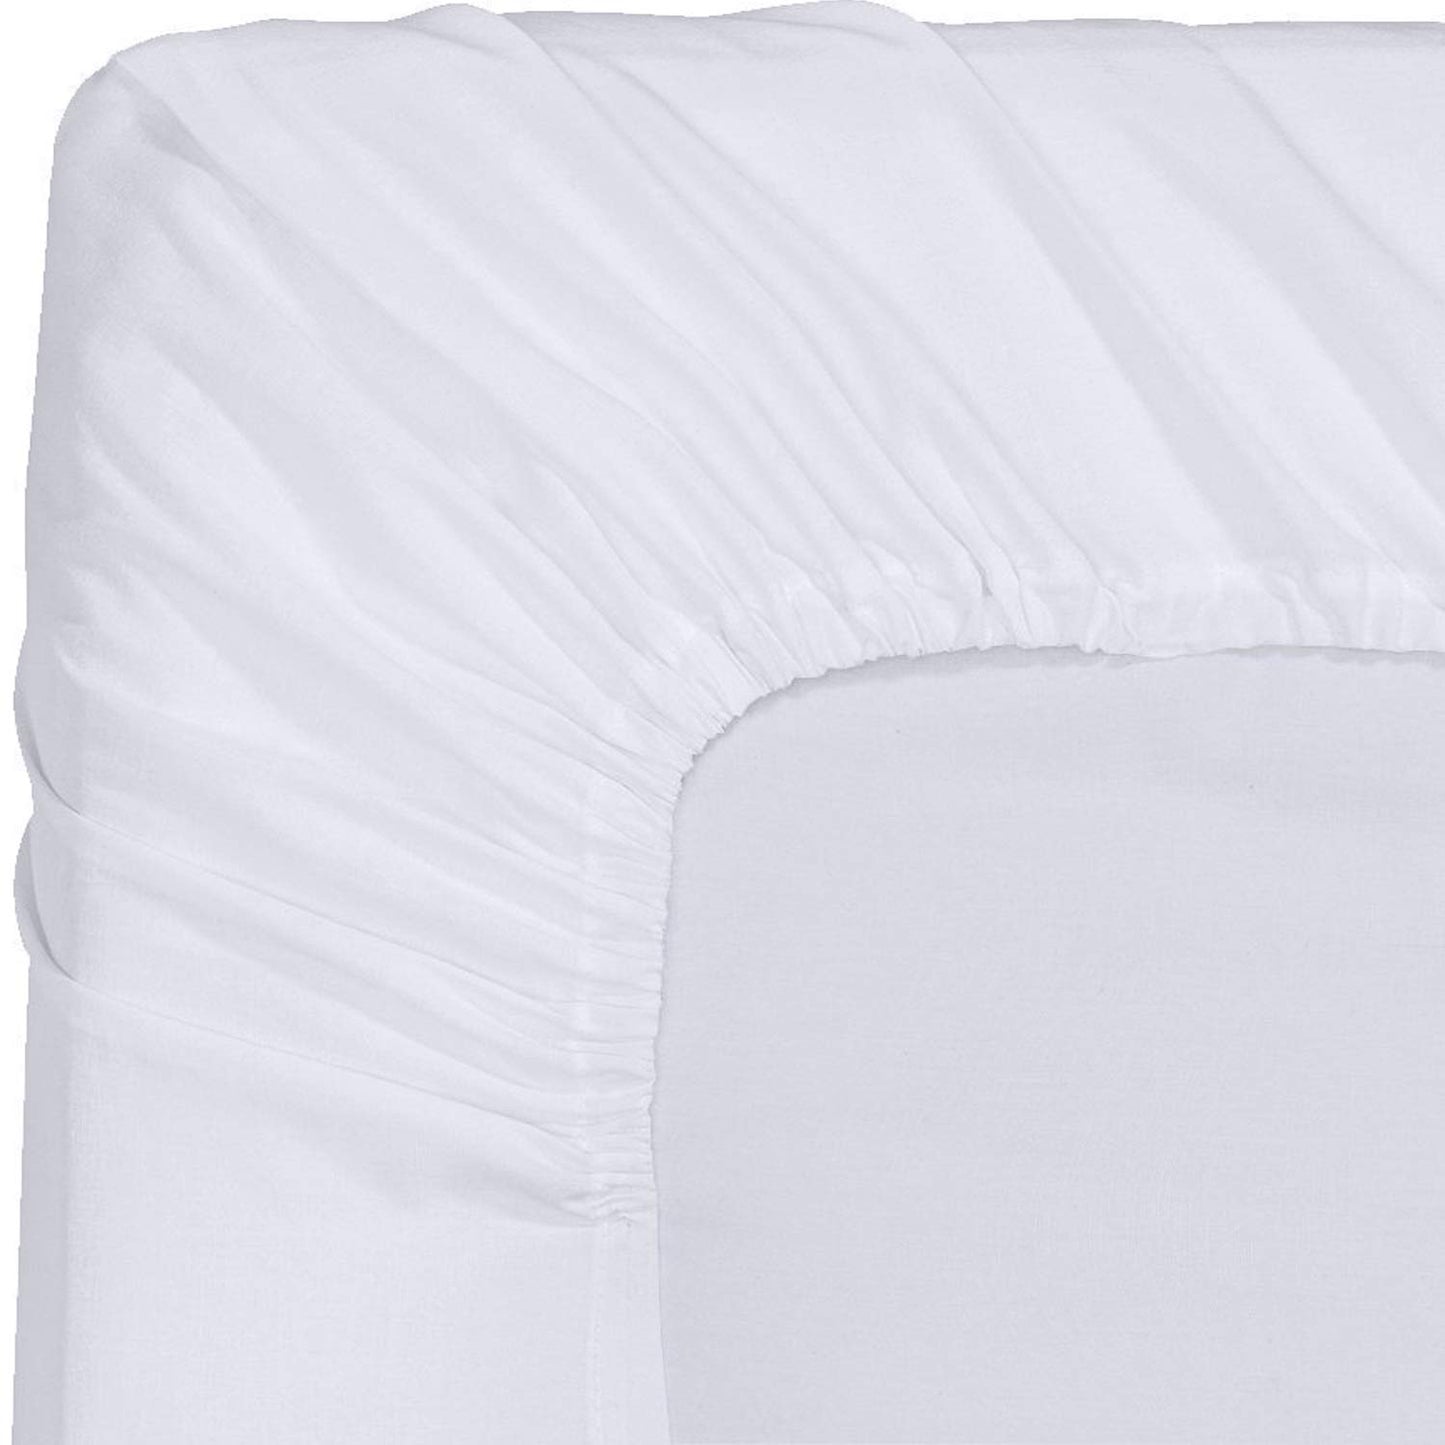 Utopia Bedding Full Fitted Sheet - Bottom Sheet - Deep Pocket - Soft Microfiber -Shrinkage and Fade Resistant-Easy Care -1 Fitted Sheet Only (White)